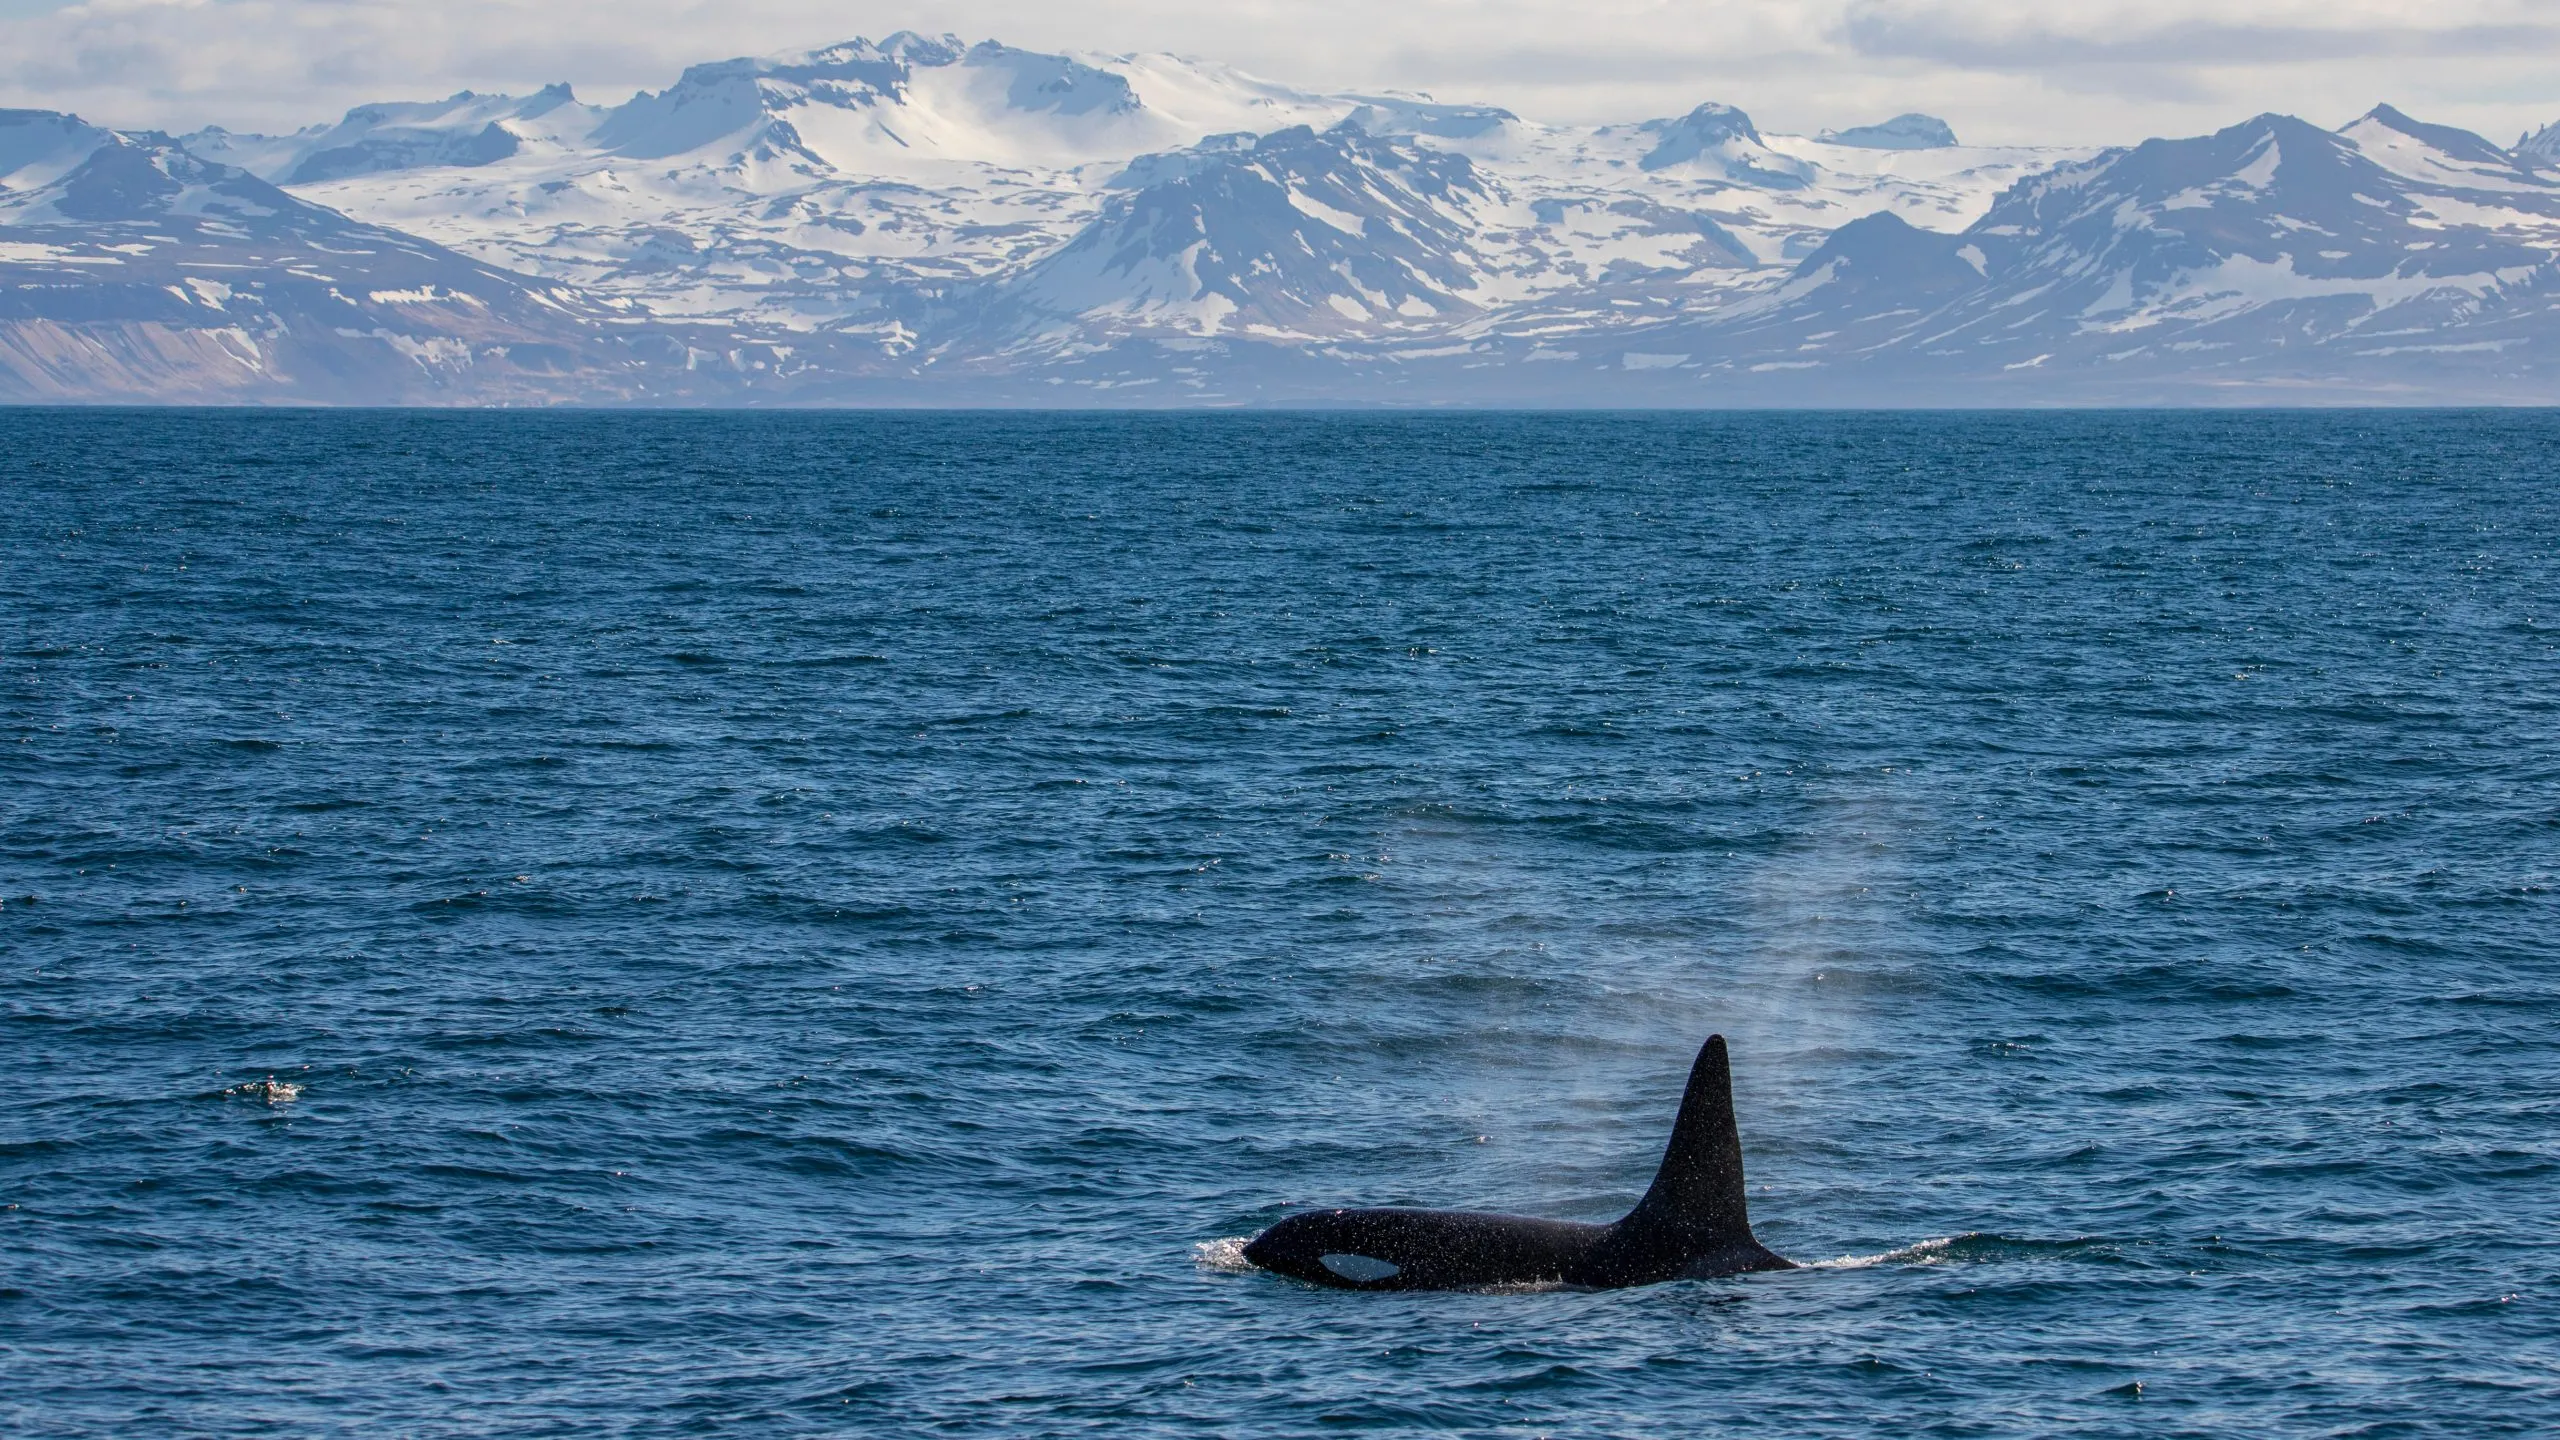 Beautiful impressive male killer whale emerging from the water with a snow-covered mountain in the background, Ólafsvík, Snæfellsnes Peninsula coast, Iceland